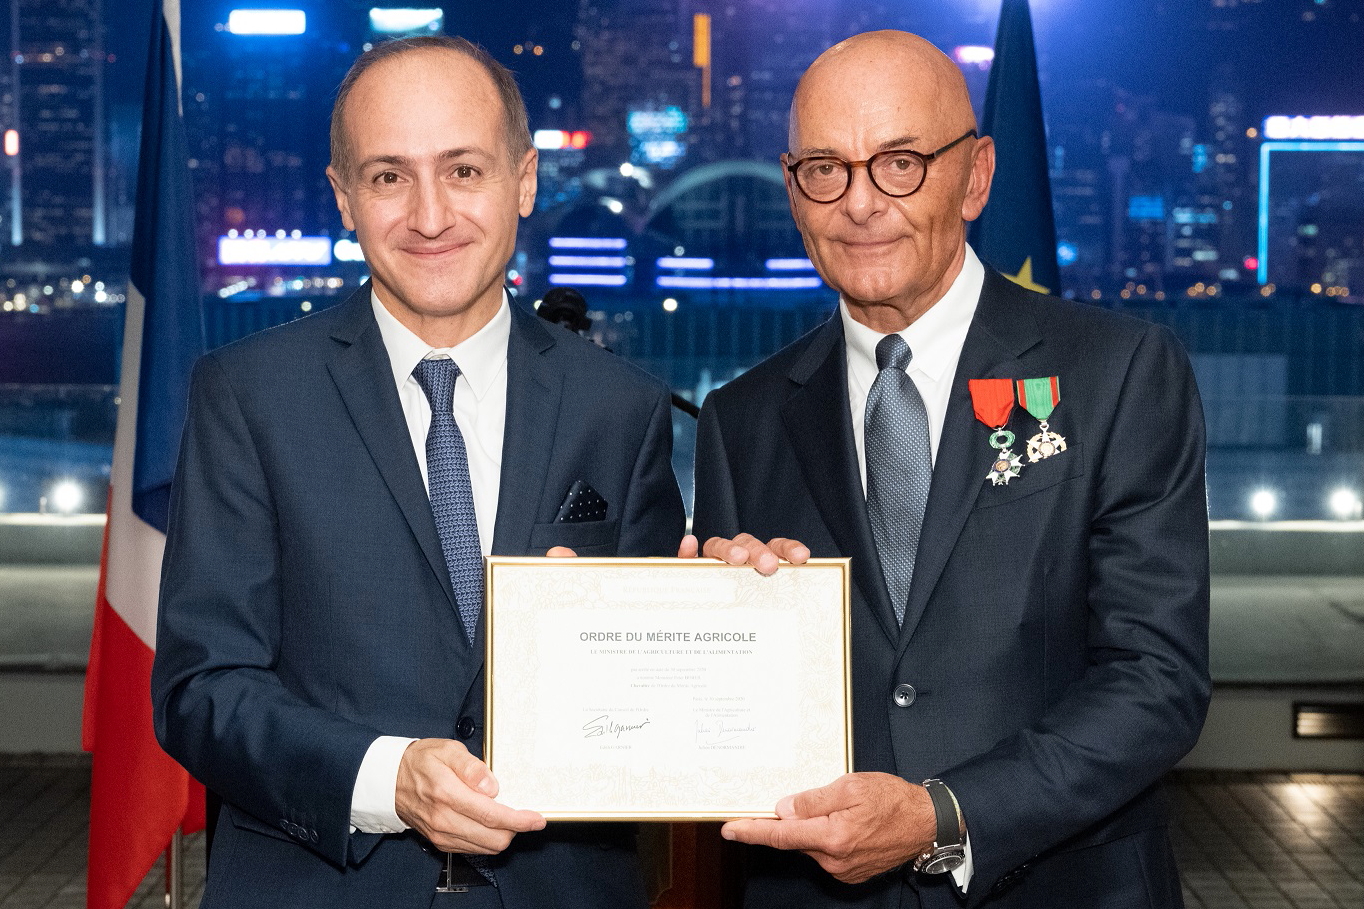 Alexandre Giorgini, Consul General of France to Hong Kong and Macau, with Peter Borer (right), Chief Operating Officer of The Hongkong and Shanghai Hotels (HSH). The French Government bestowed the distinction of Chevalier dans l’Ordre National de la Légion d’Honneur and Chevalier dans l'Ordre du Mérite Agricole on Mr Borer Wednesday. Click to enlarge.